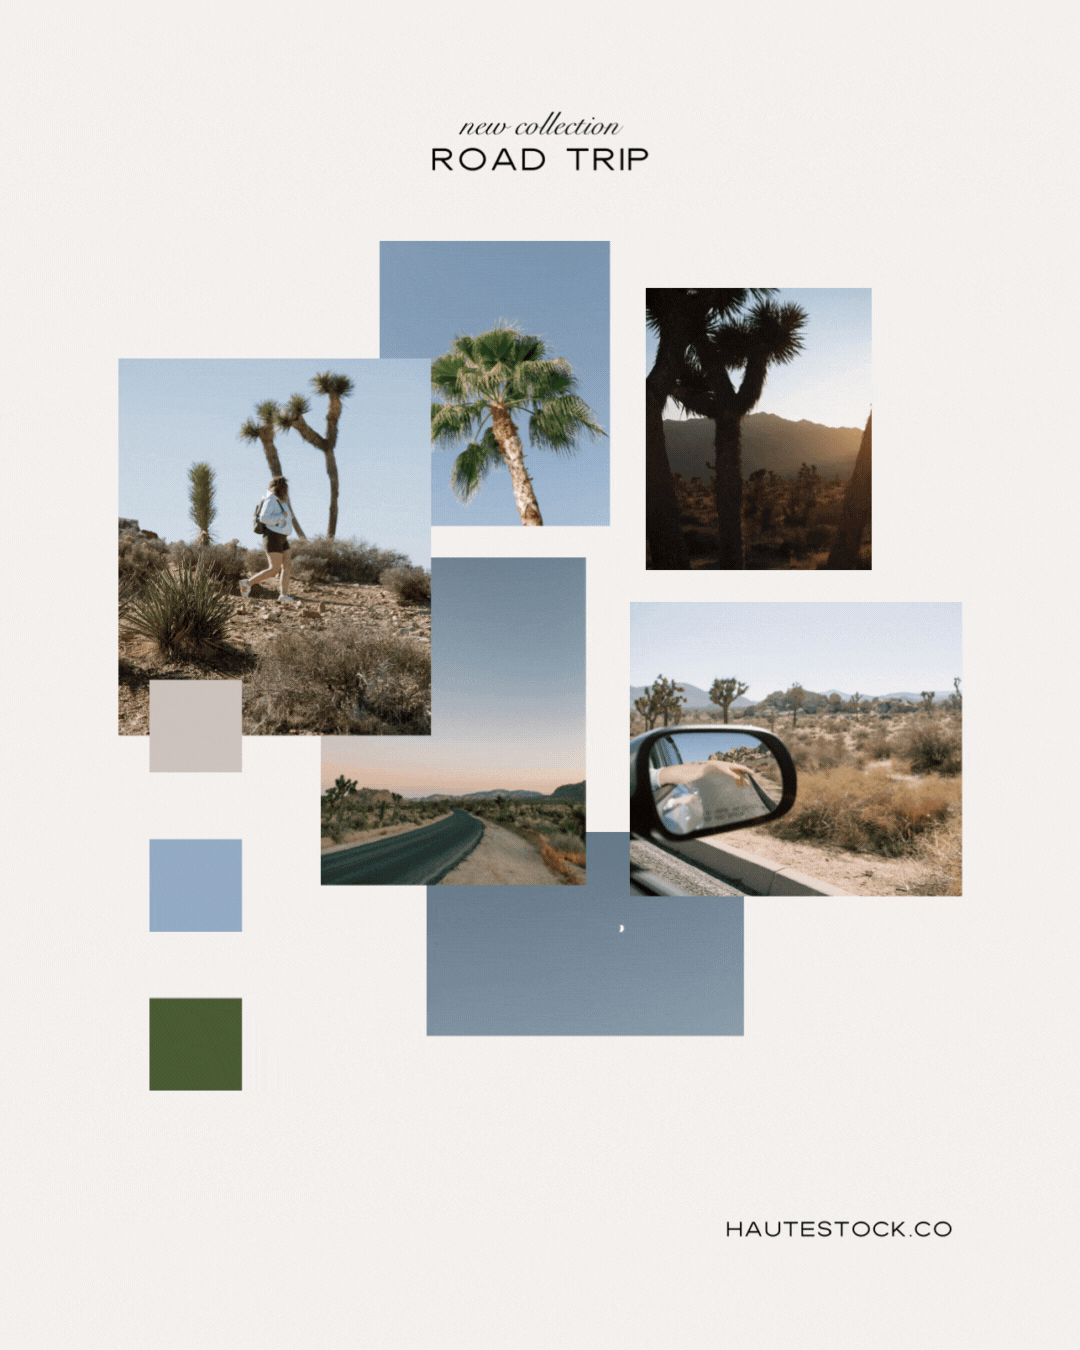 Mood board for Road Trip collection of desert adventures bohemian stock photos and videos that feel authentic, earthy and natural.